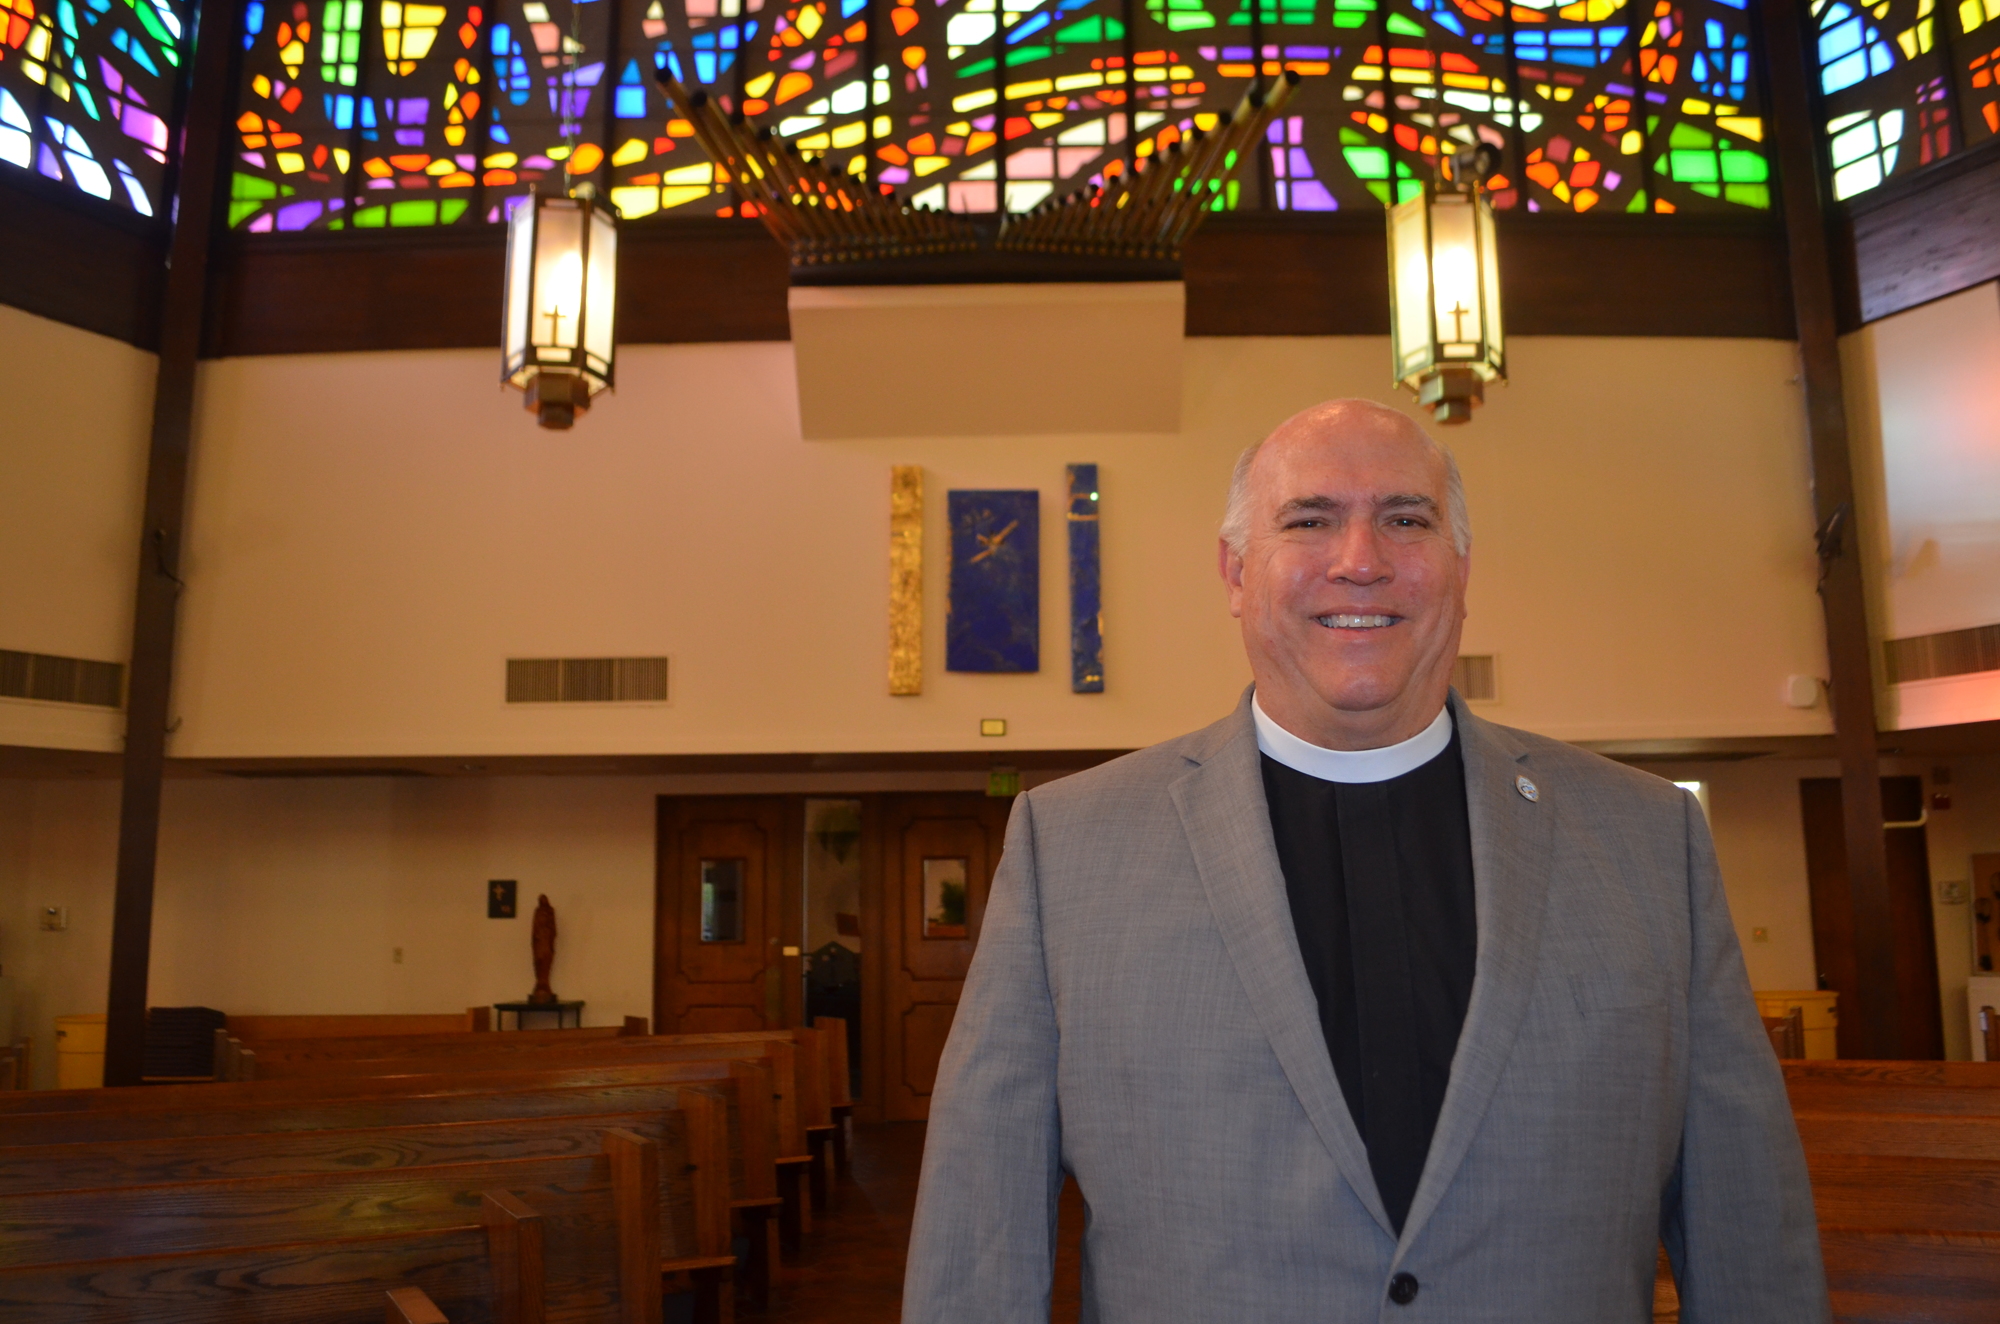 The Rev. Wayne Farrell is part of SURE's campaign to invest more local funds in affordable housing, calling the issue a pressing one among the religious group’s members.